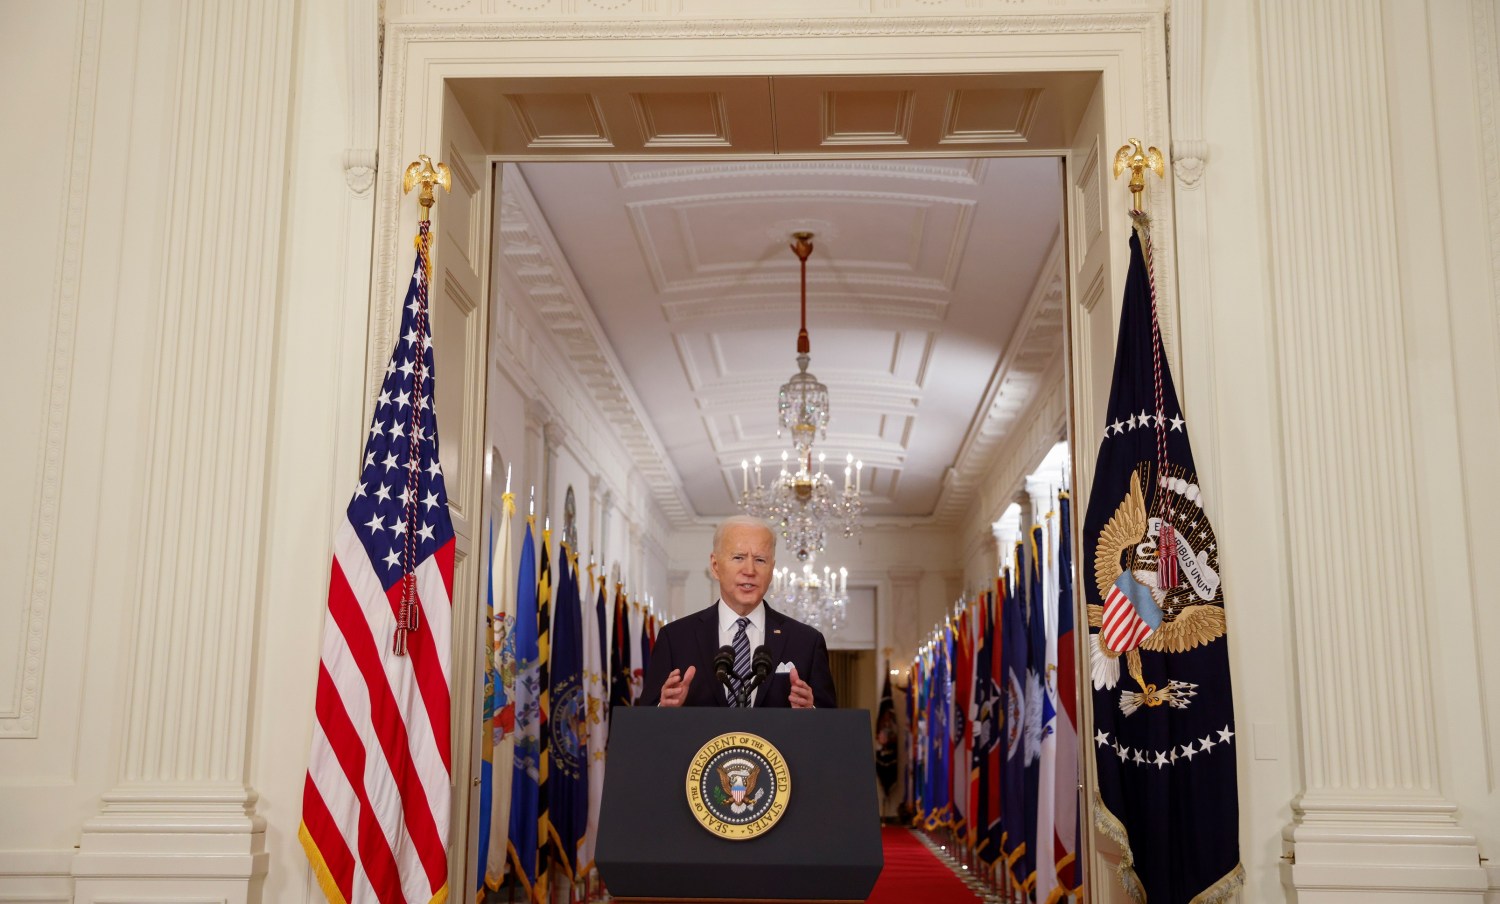 U.S. President Joe Biden delivers his first prime time address as president, marking the one-year anniversary of widespread shutdowns to combat the coronavirus disease (COVID-19) pandemic and speaking about the impact of the pandemic from the East Room of the White House in Washington, U.S., March 11, 2021. REUTERS/Tom Brenner